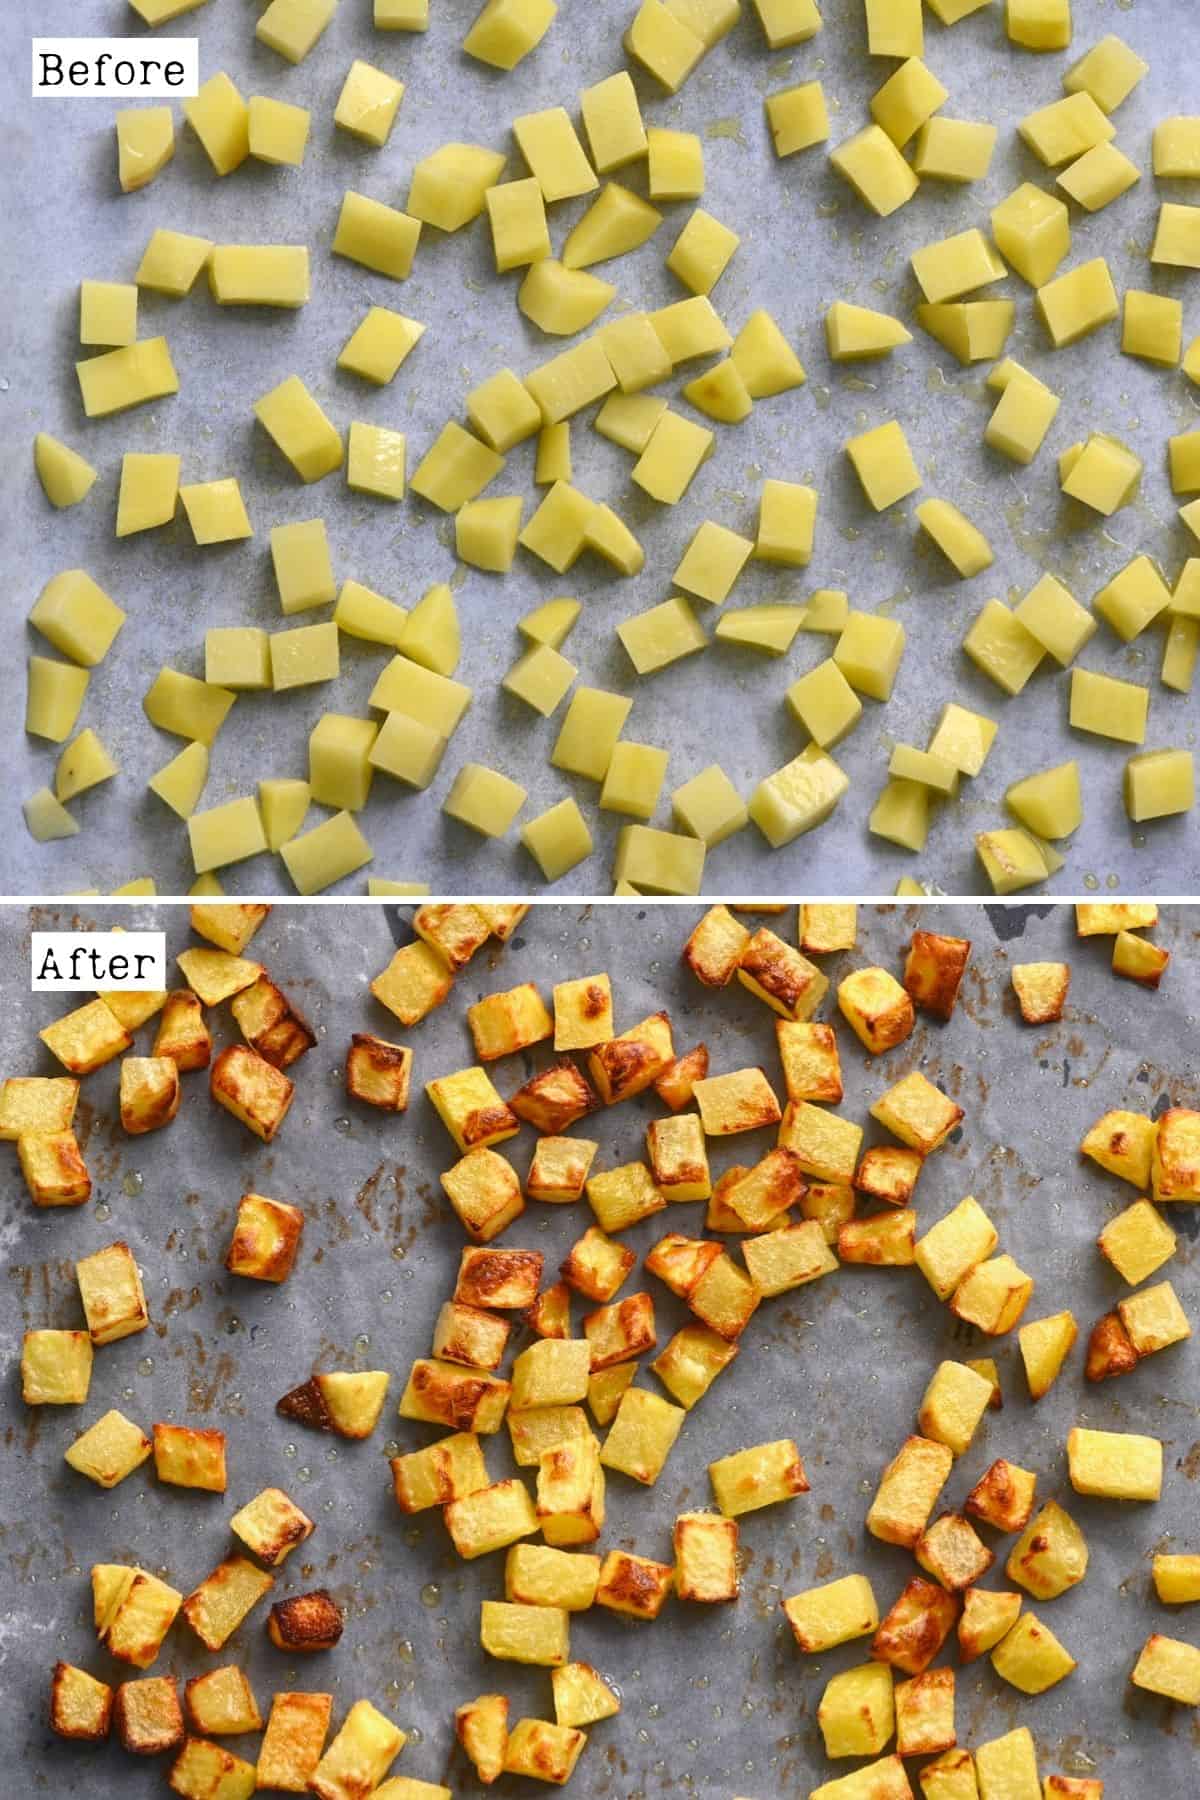 Before and after roasting potatoes in the oven